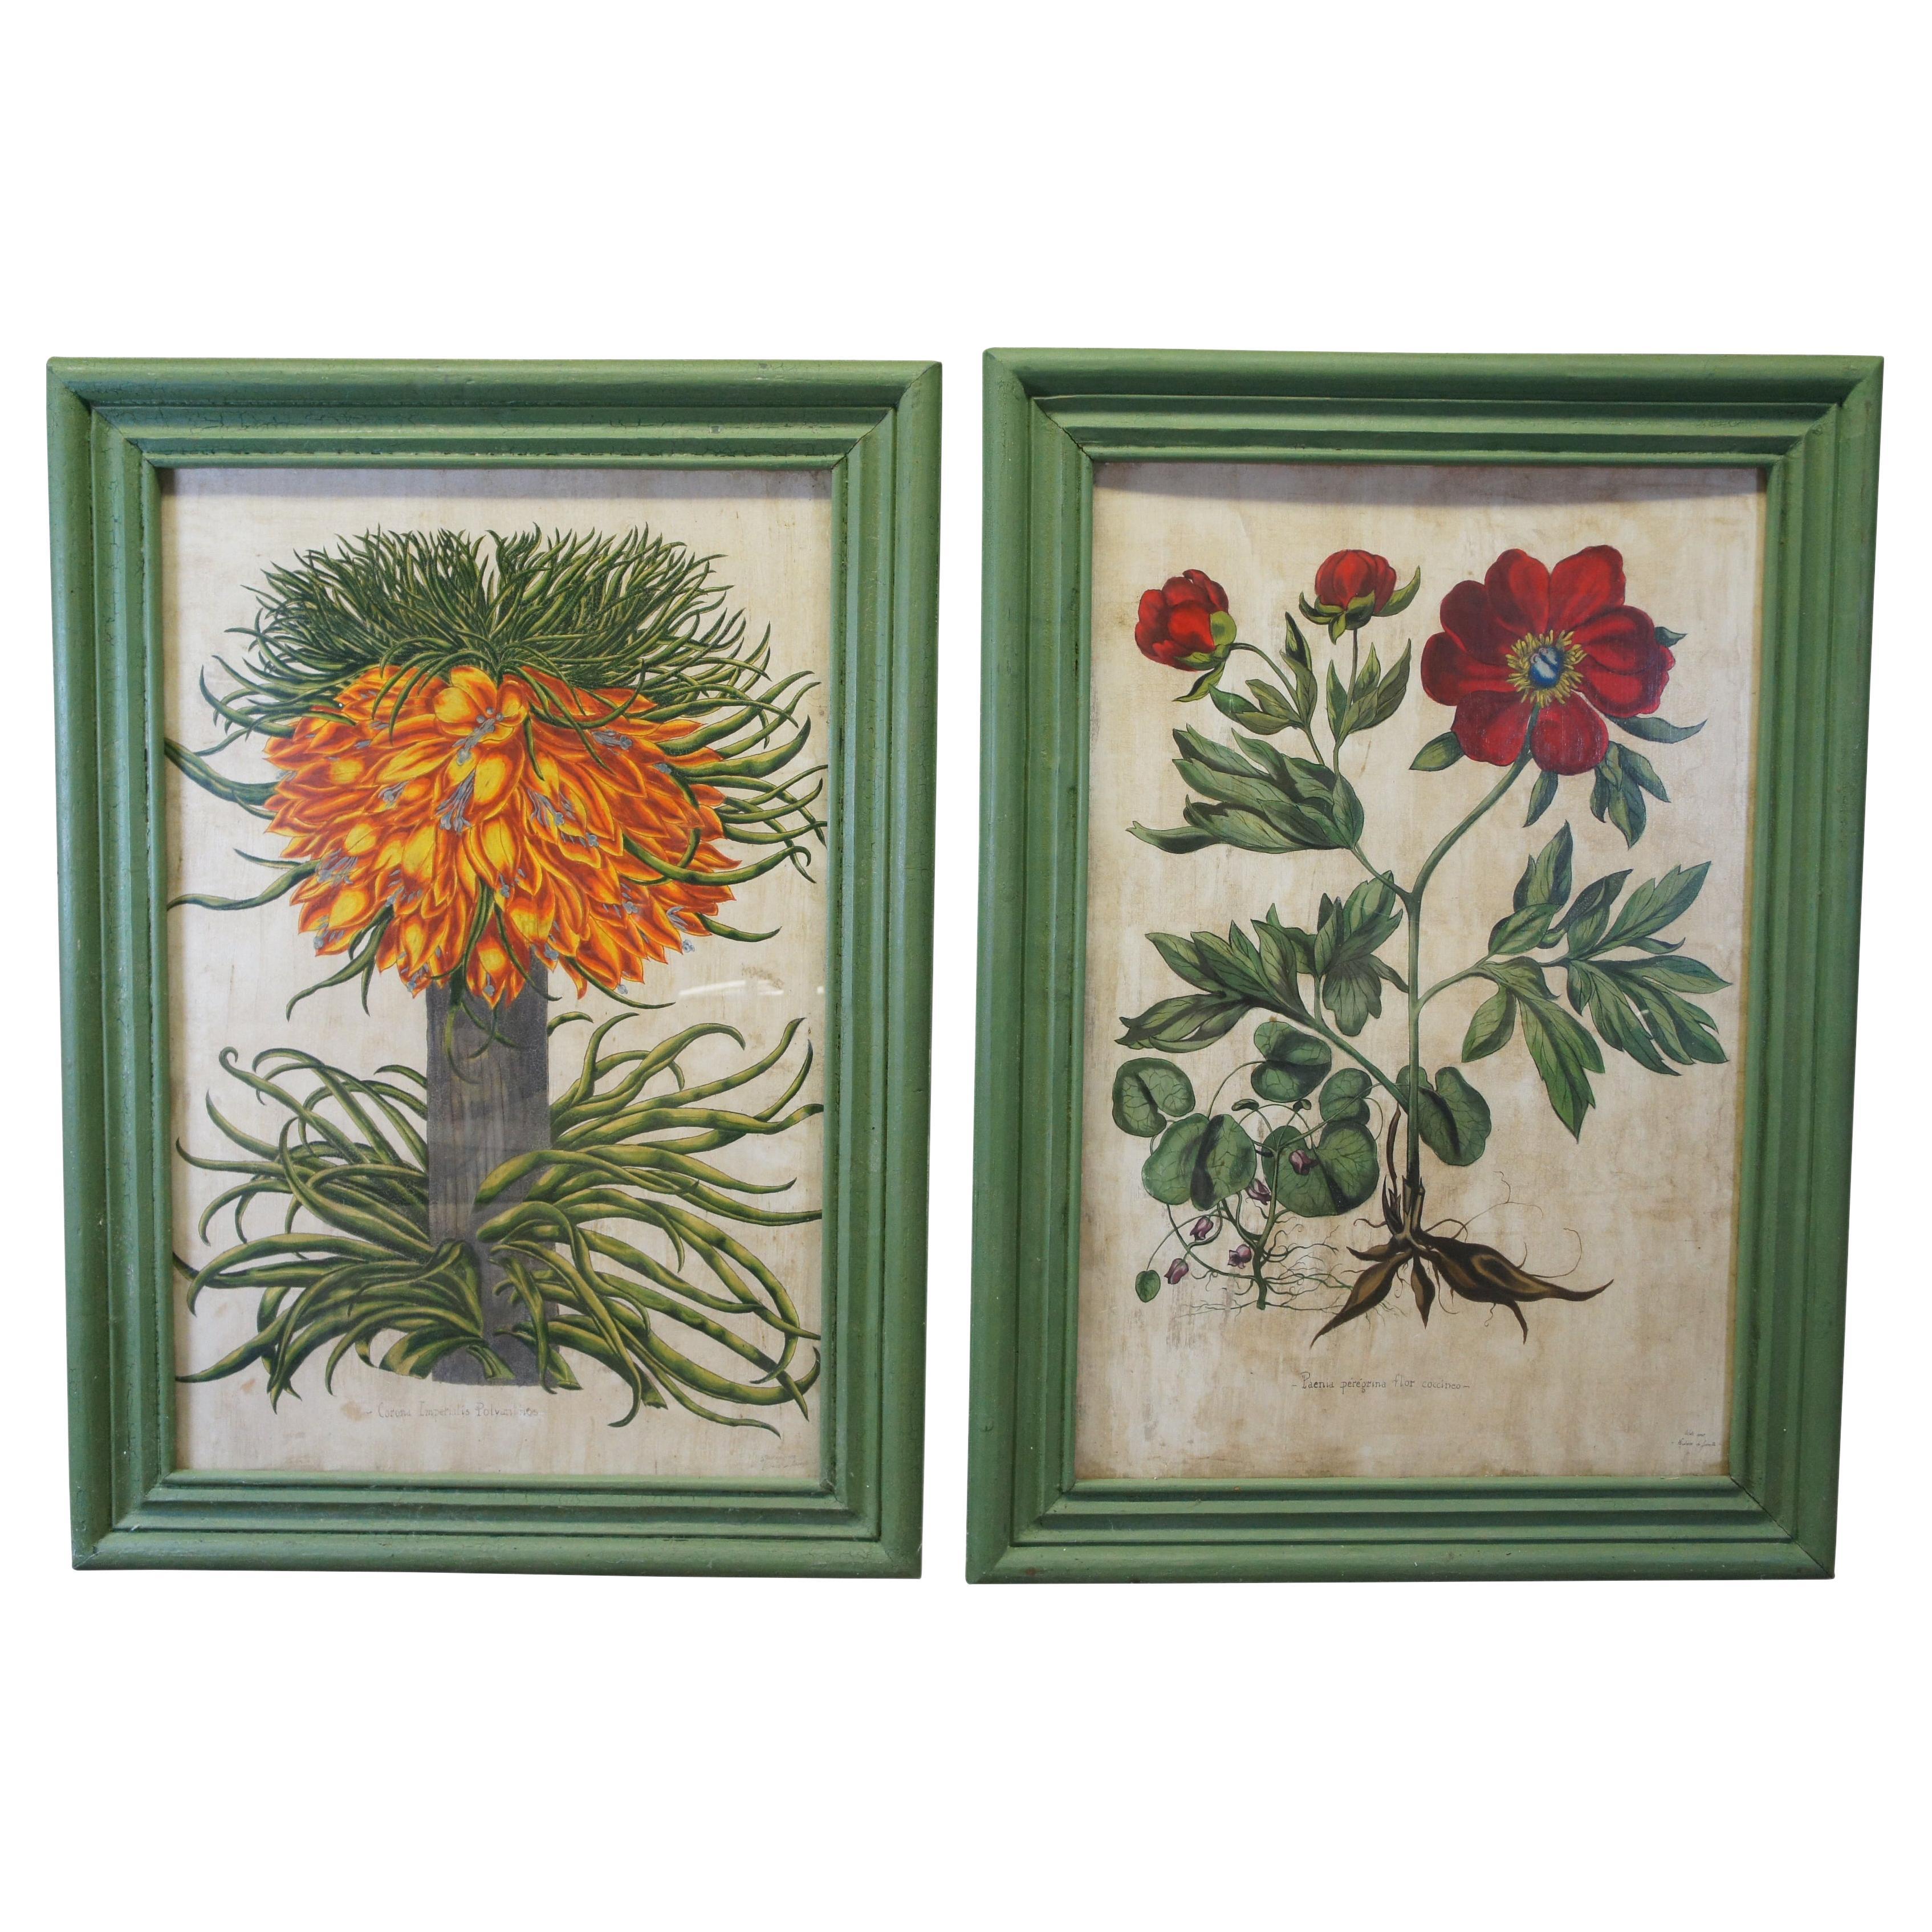 2 Hand Painted Old World Floral Botanical Paintings After Basilius Besler 57"